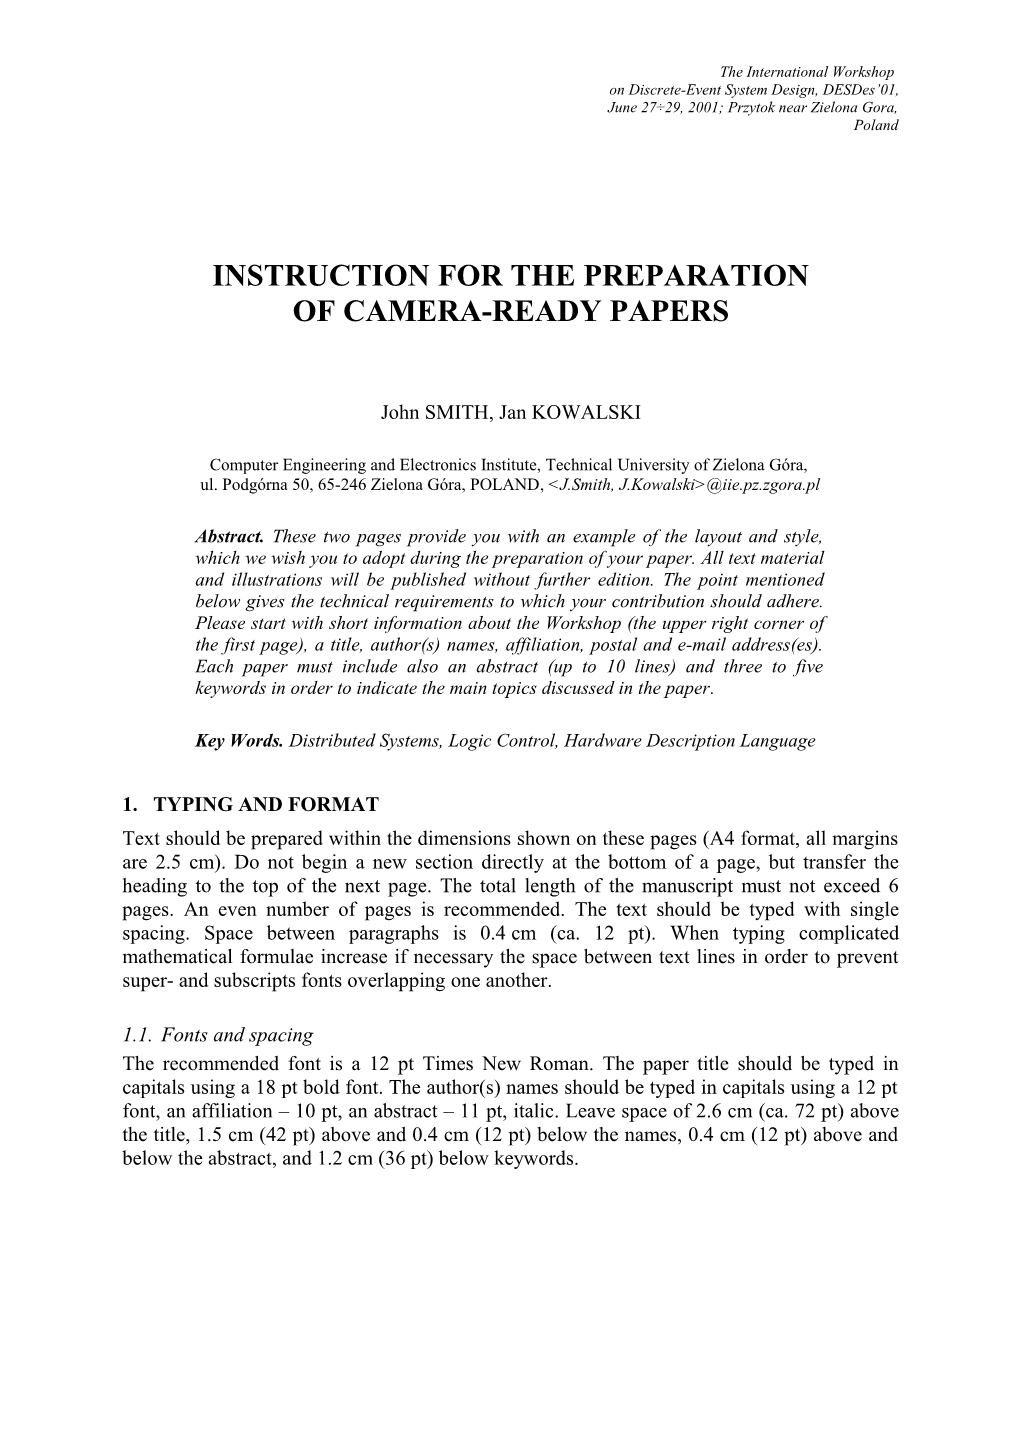 Instruction for the Preparation of Camera-Ready Papers